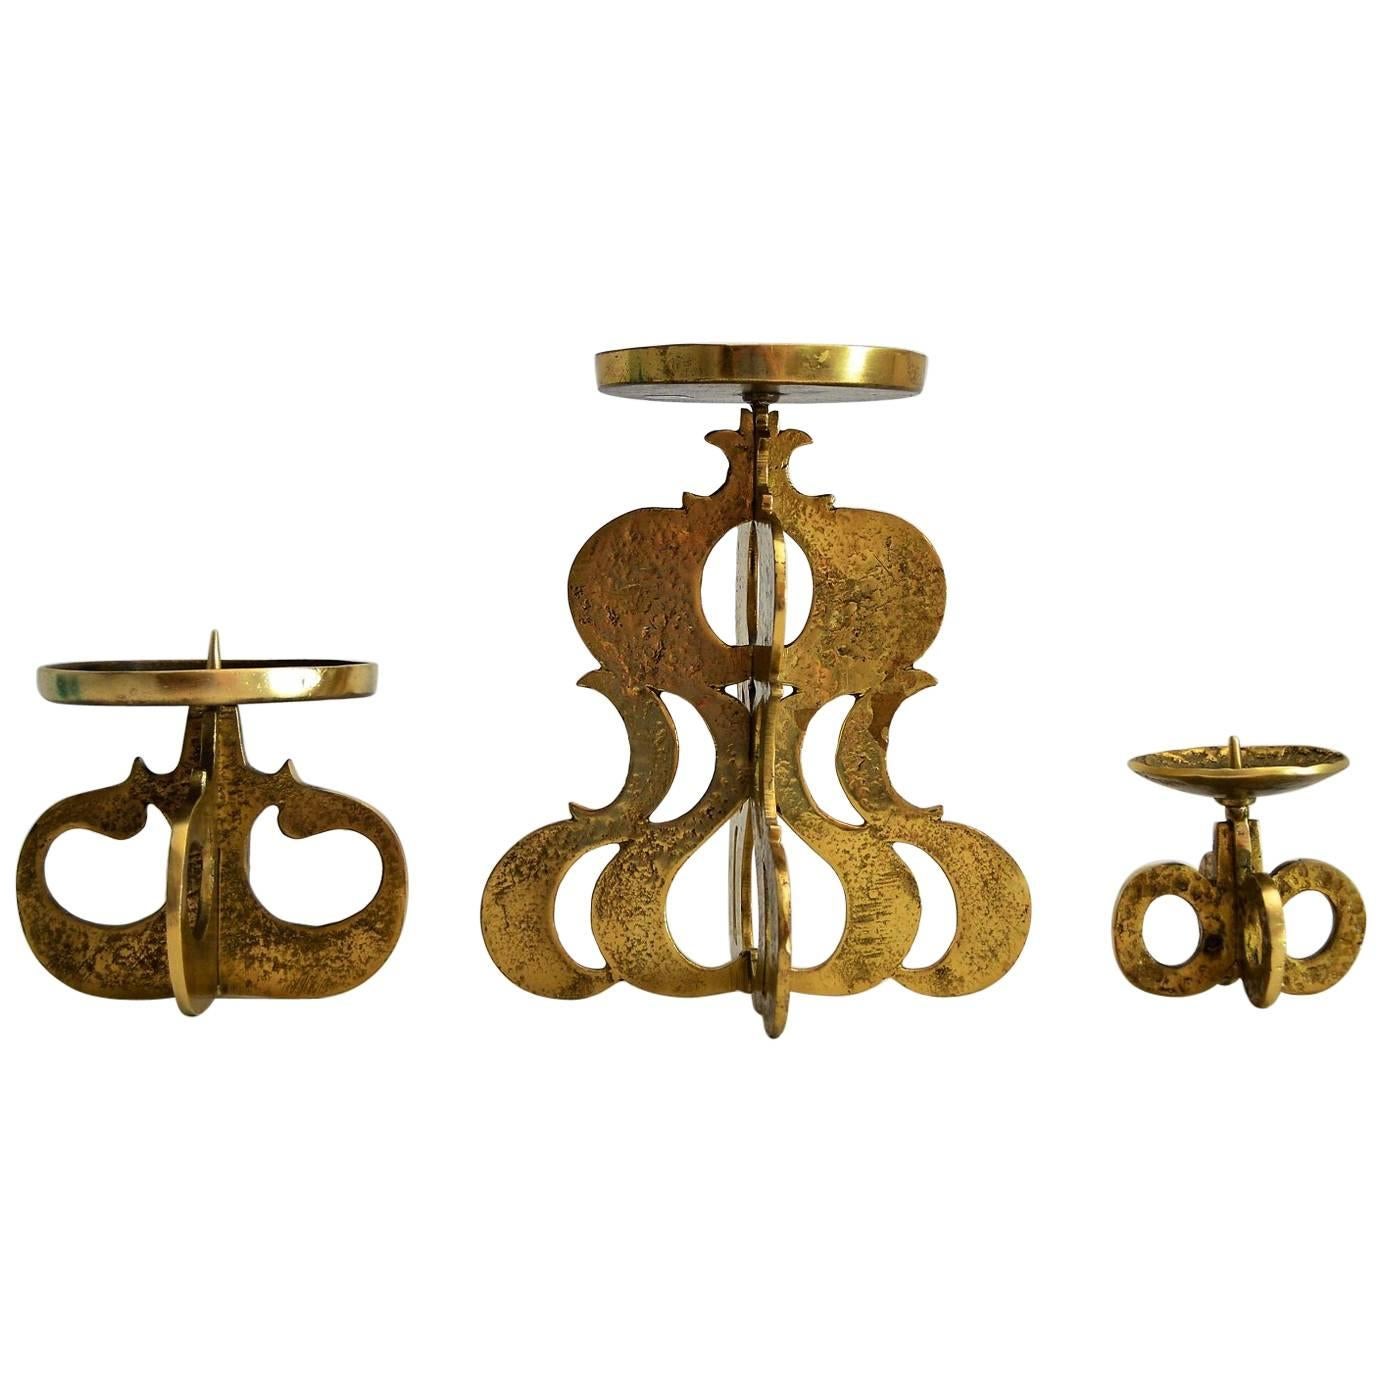 Midcentury Candlestick Holder in Brass in the Brutalist Style, Set of three